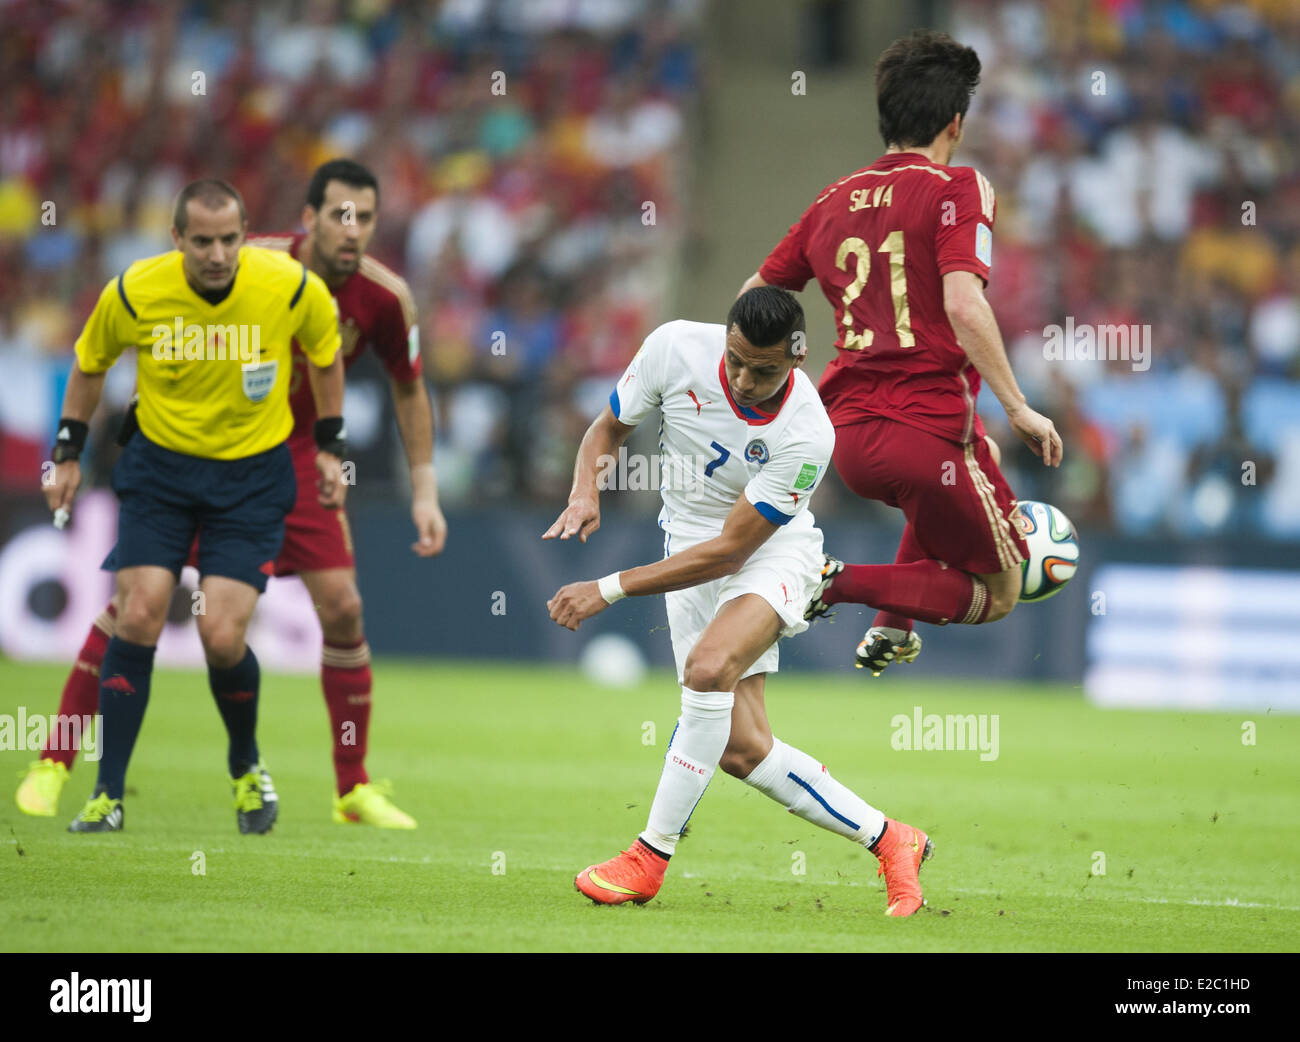 Porto Alegre, Brazil. 18th June, 2014.  David Silva and Alexis in the match between Spain and Chile in the group stage of the 2014 World Cup, for the group B match at the Beira Rio stadium, on June 18, 2014  Credit:  Urbanandsport/NurPhoto/ZUMAPRESS.com/Alamy Live News Stock Photo